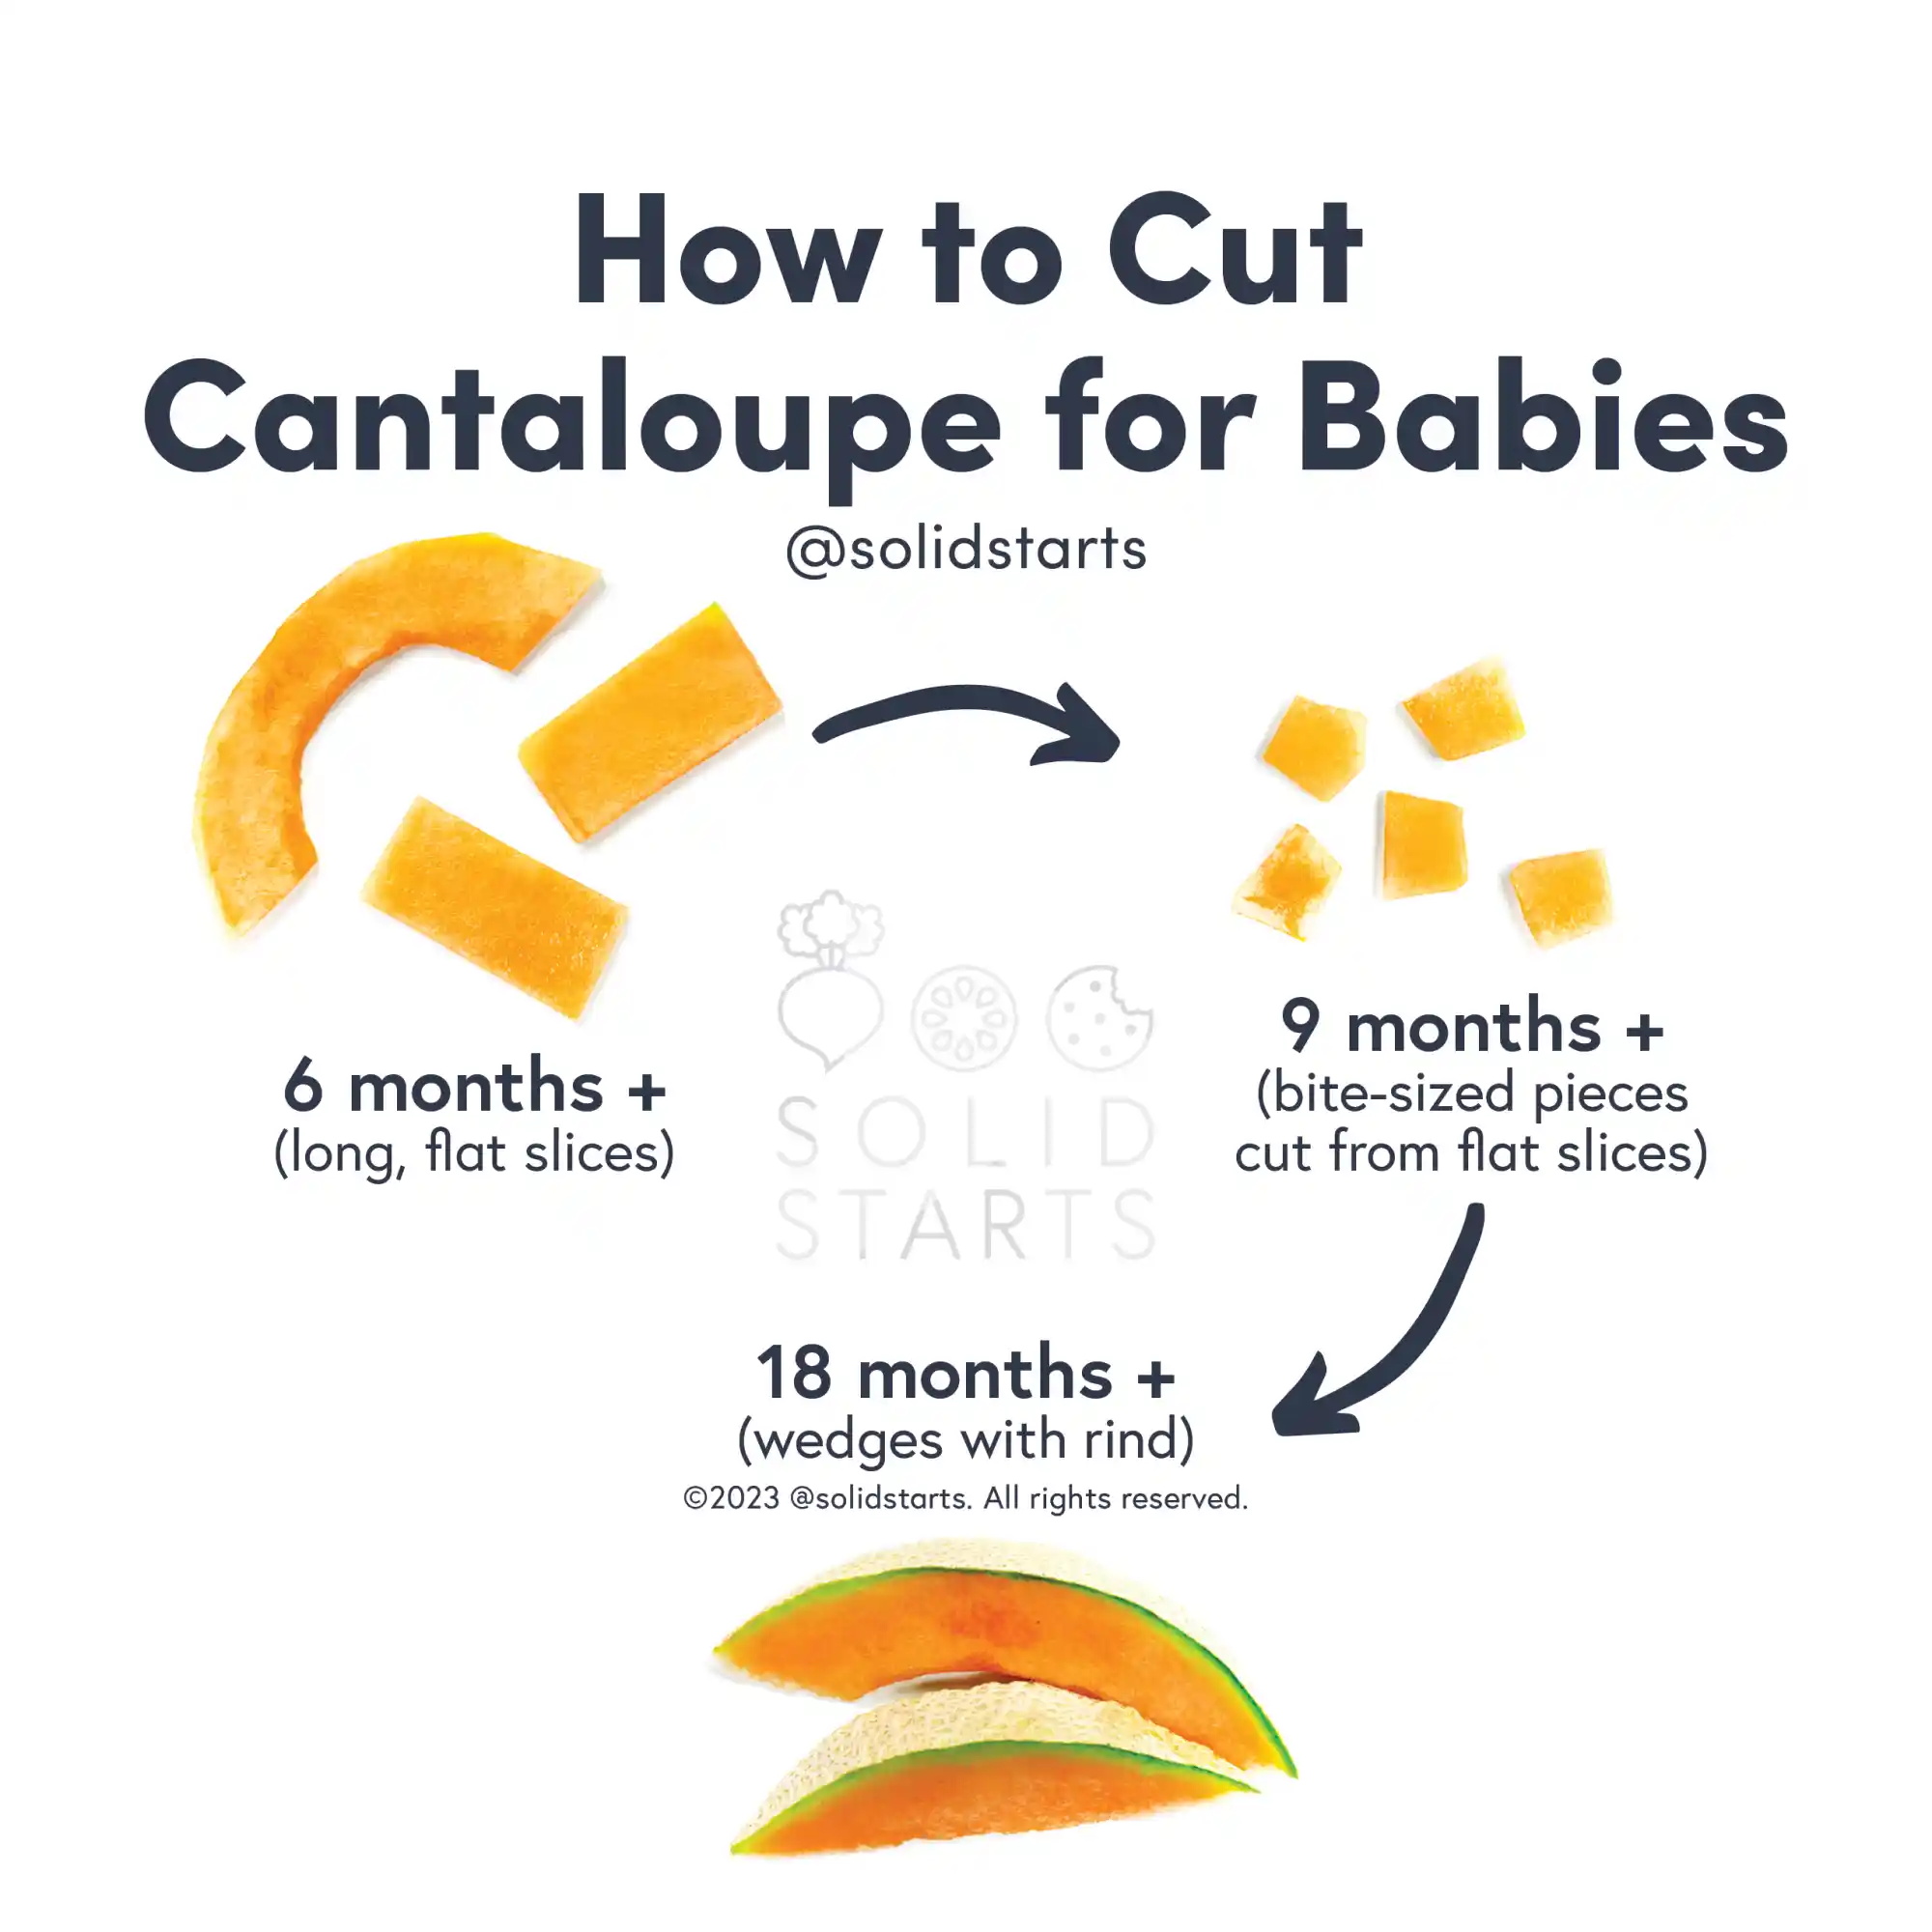 a Solid Starts infographic with the header How to Cut Cantaloupe for Babies: long, flat slices for 6 months+, small pieces cut from flat slices for 9 months+, and wedges with rind on for 18 months+